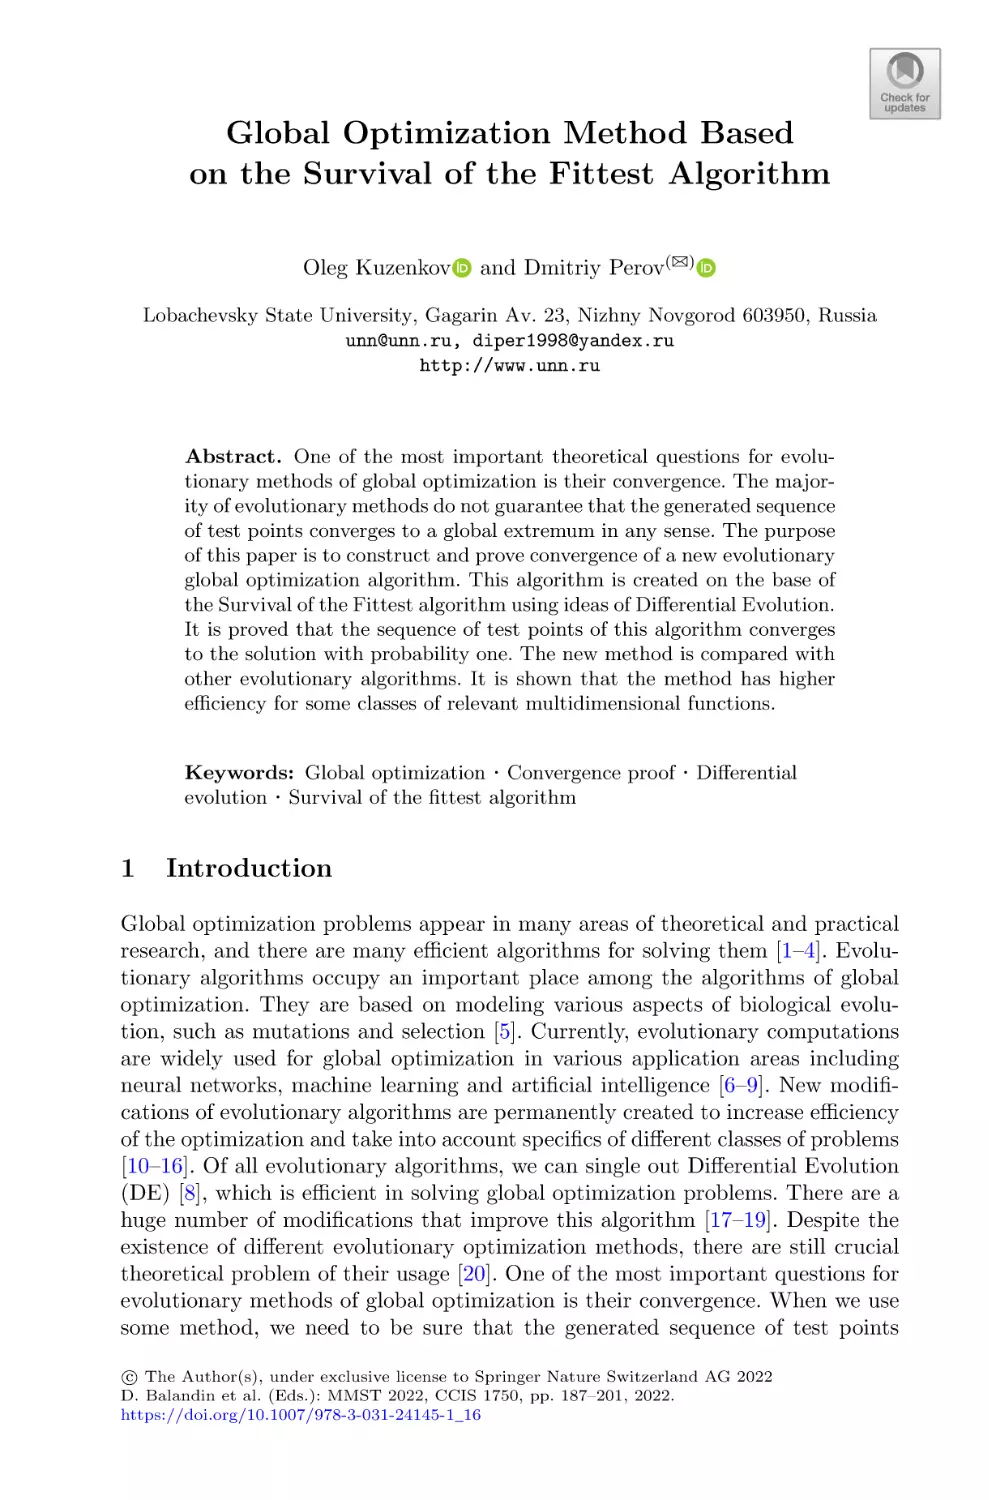 Global Optimization Method Based on the Survival of the Fittest Algorithm
1 Introduction